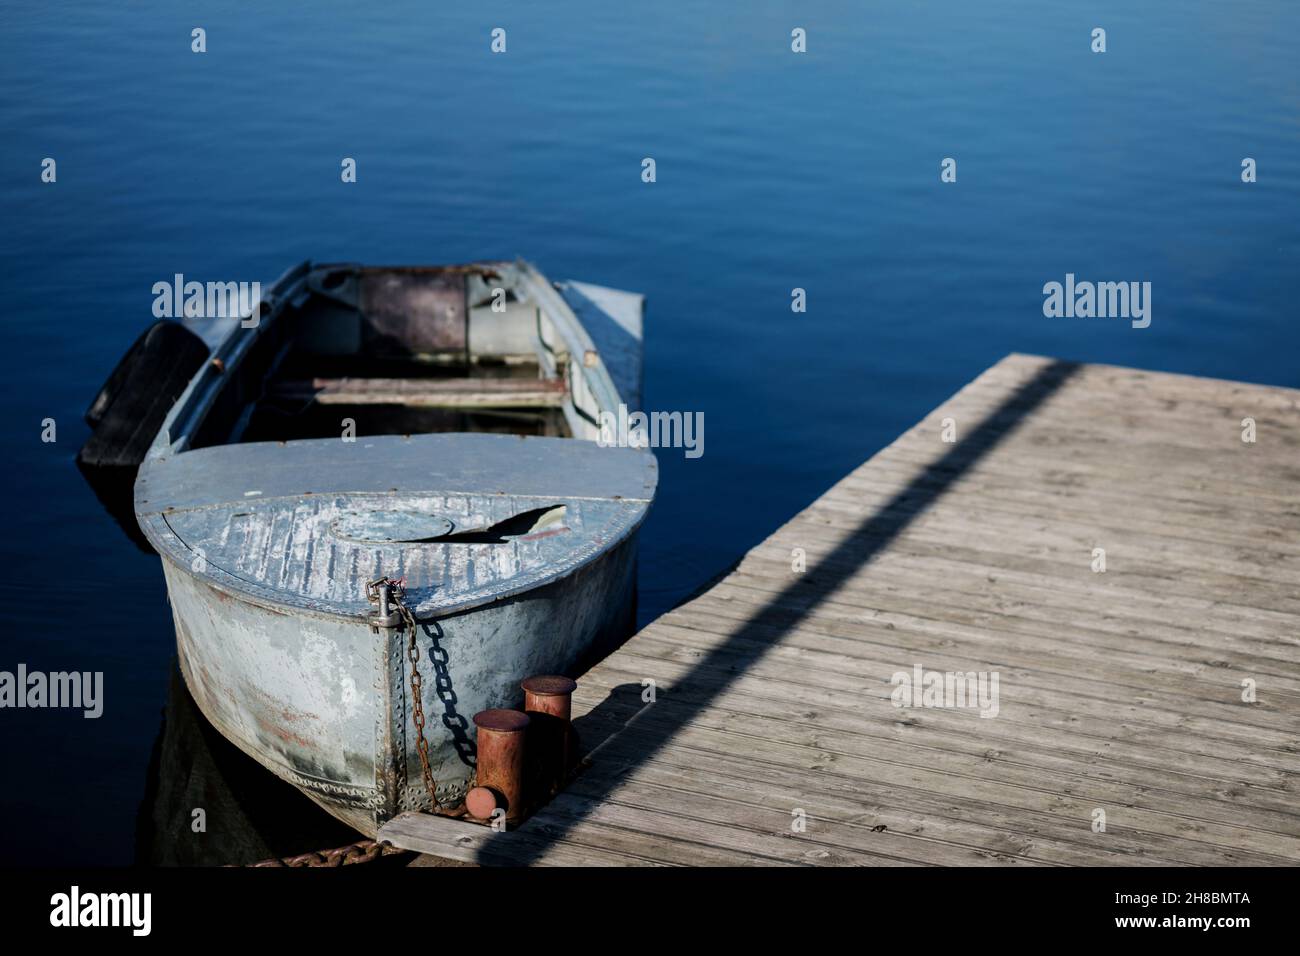 https://c8.alamy.com/comp/2H8BMTA/old-small-boat-floating-on-the-lake-near-the-pier-2H8BMTA.jpg